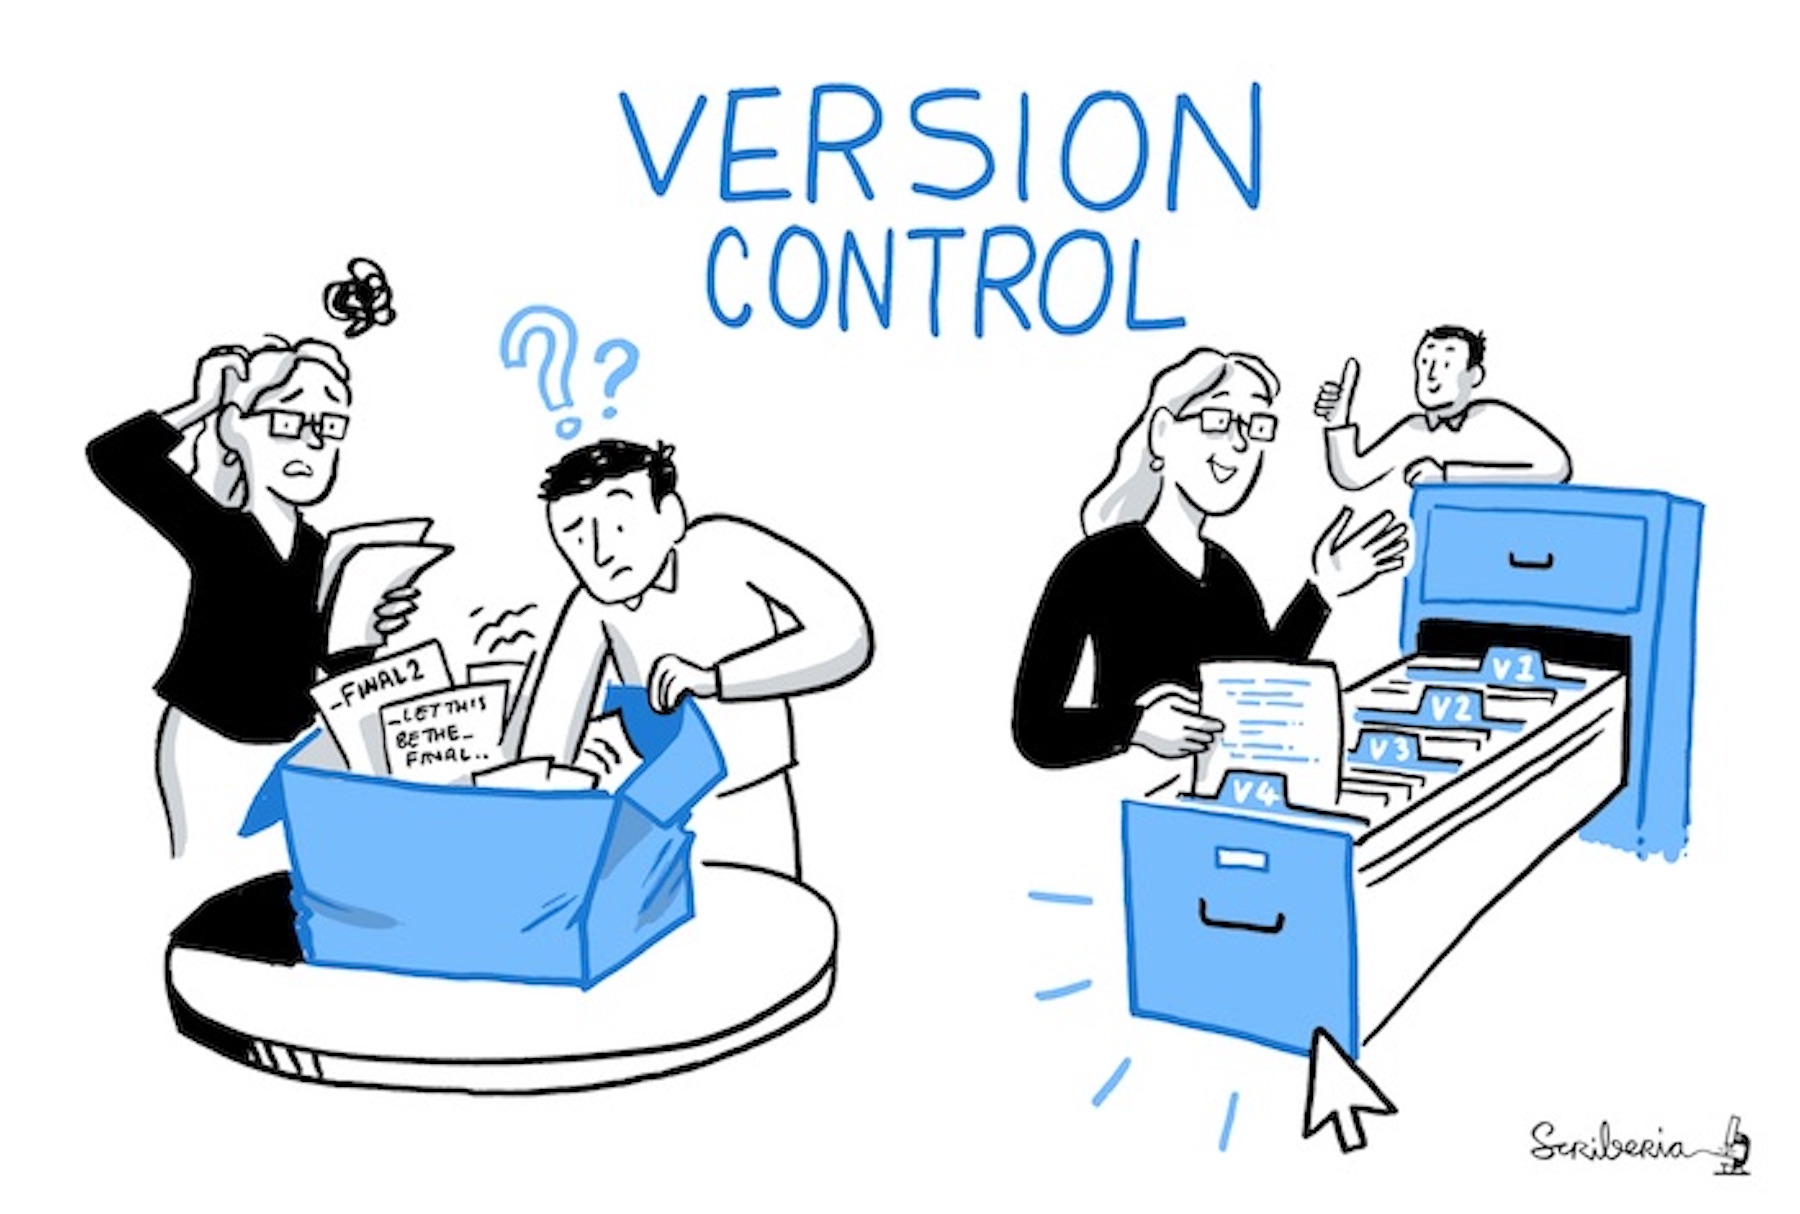 An illustration demonstrating the value and importance of version control. Two people are shown in two different scenarios. In one there is no version control. They people look through a messy, unorganised box unable to find what they want. In the other scenario, with version control, the work is neatly organised in a filing cabinet with dividers marking distinct versions. The people are easily able to find what they are looking for.